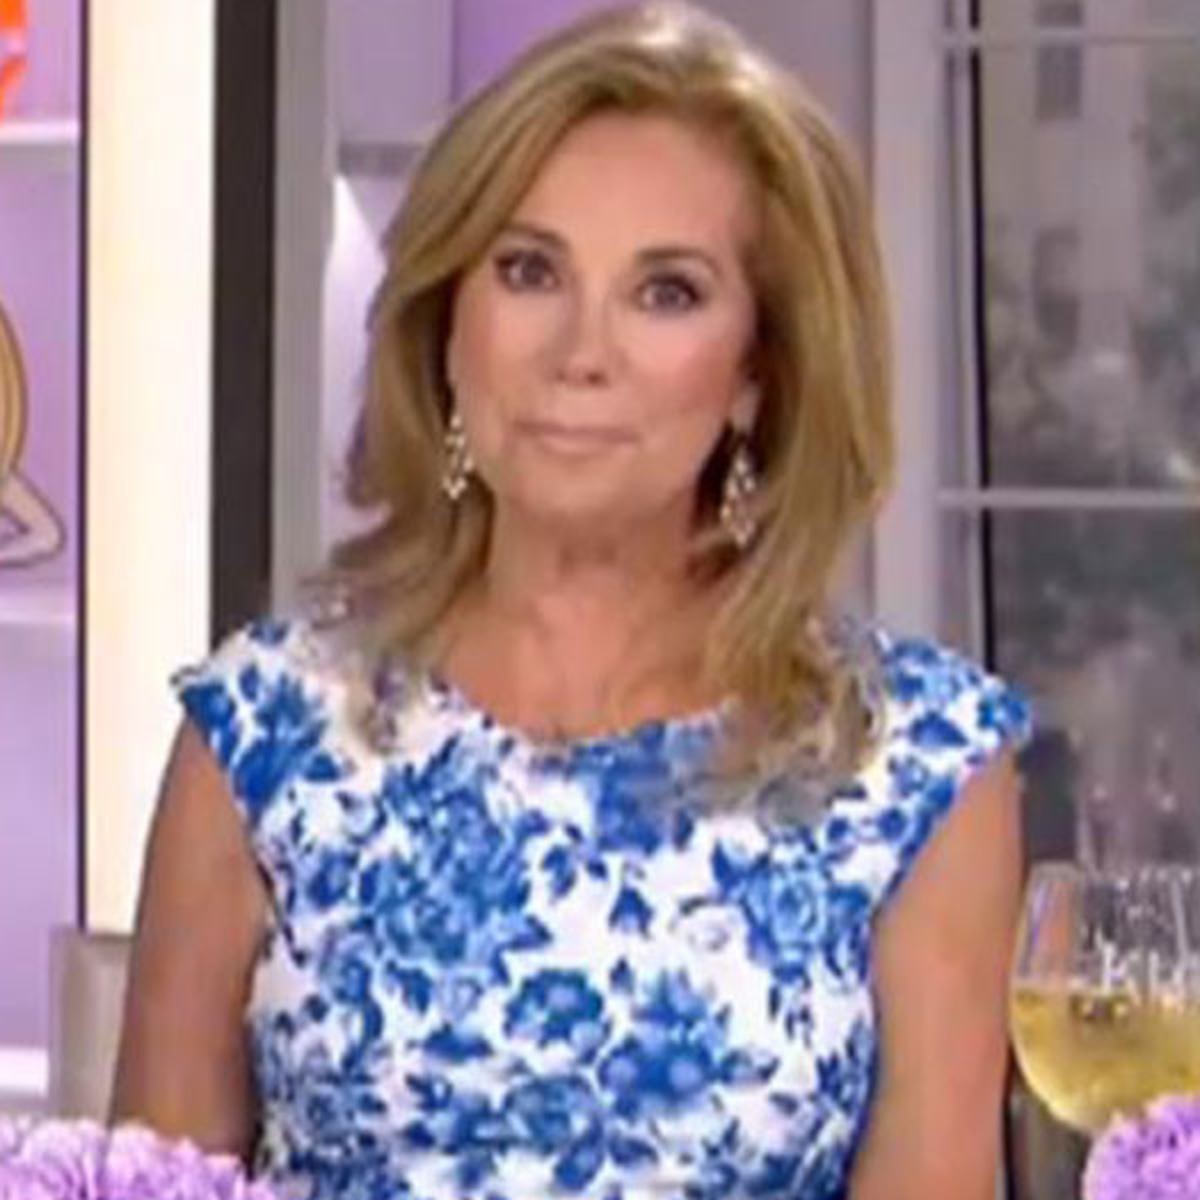 Kathie Lee Gifford Returns to Today After Frank Gifford's Death - E! Online